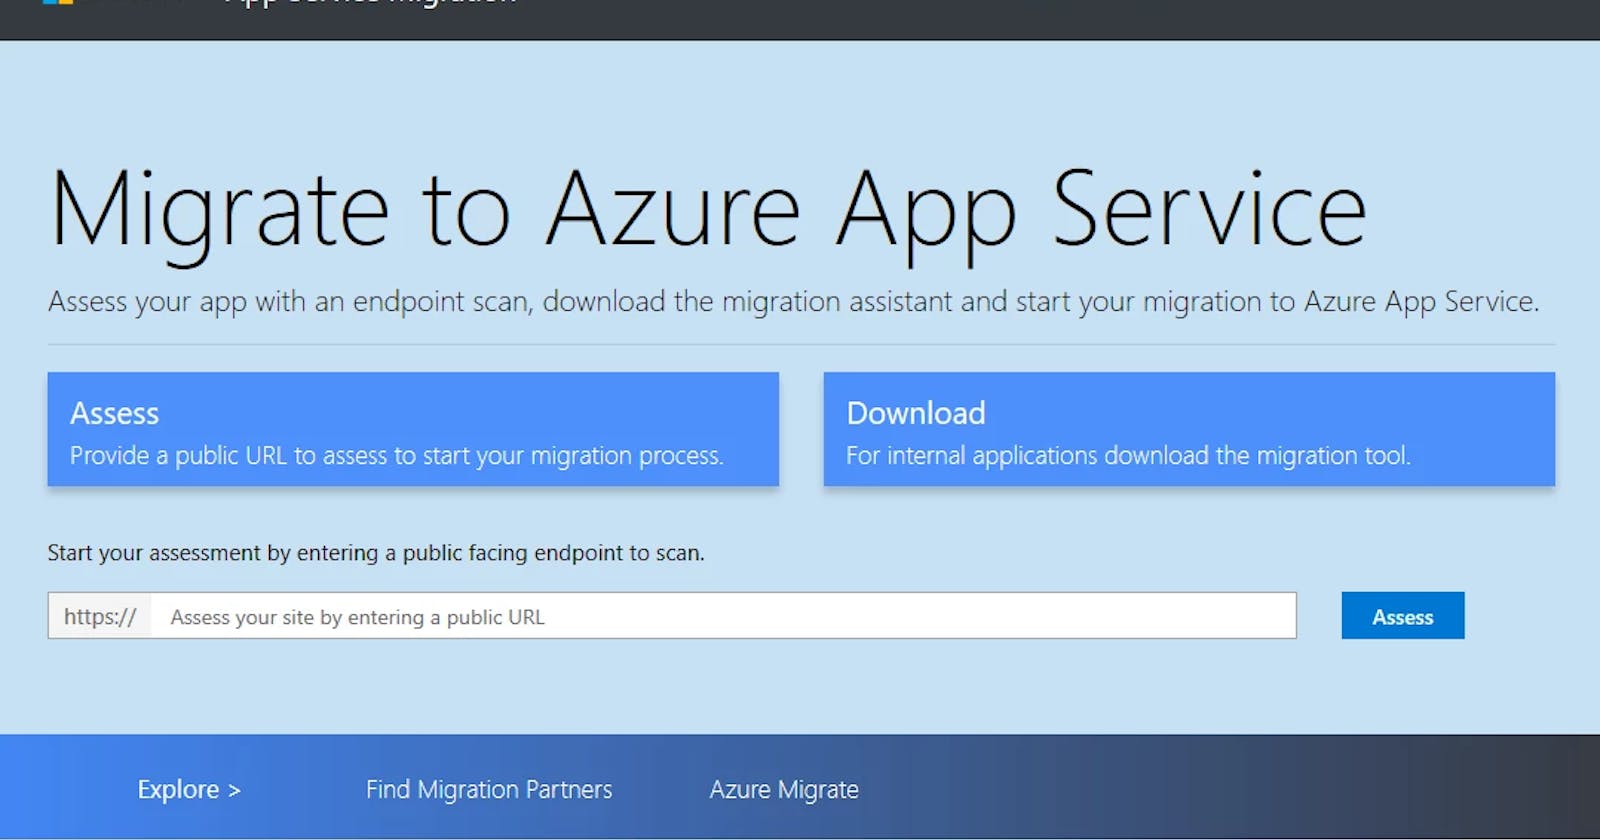 Migrating to the App Service